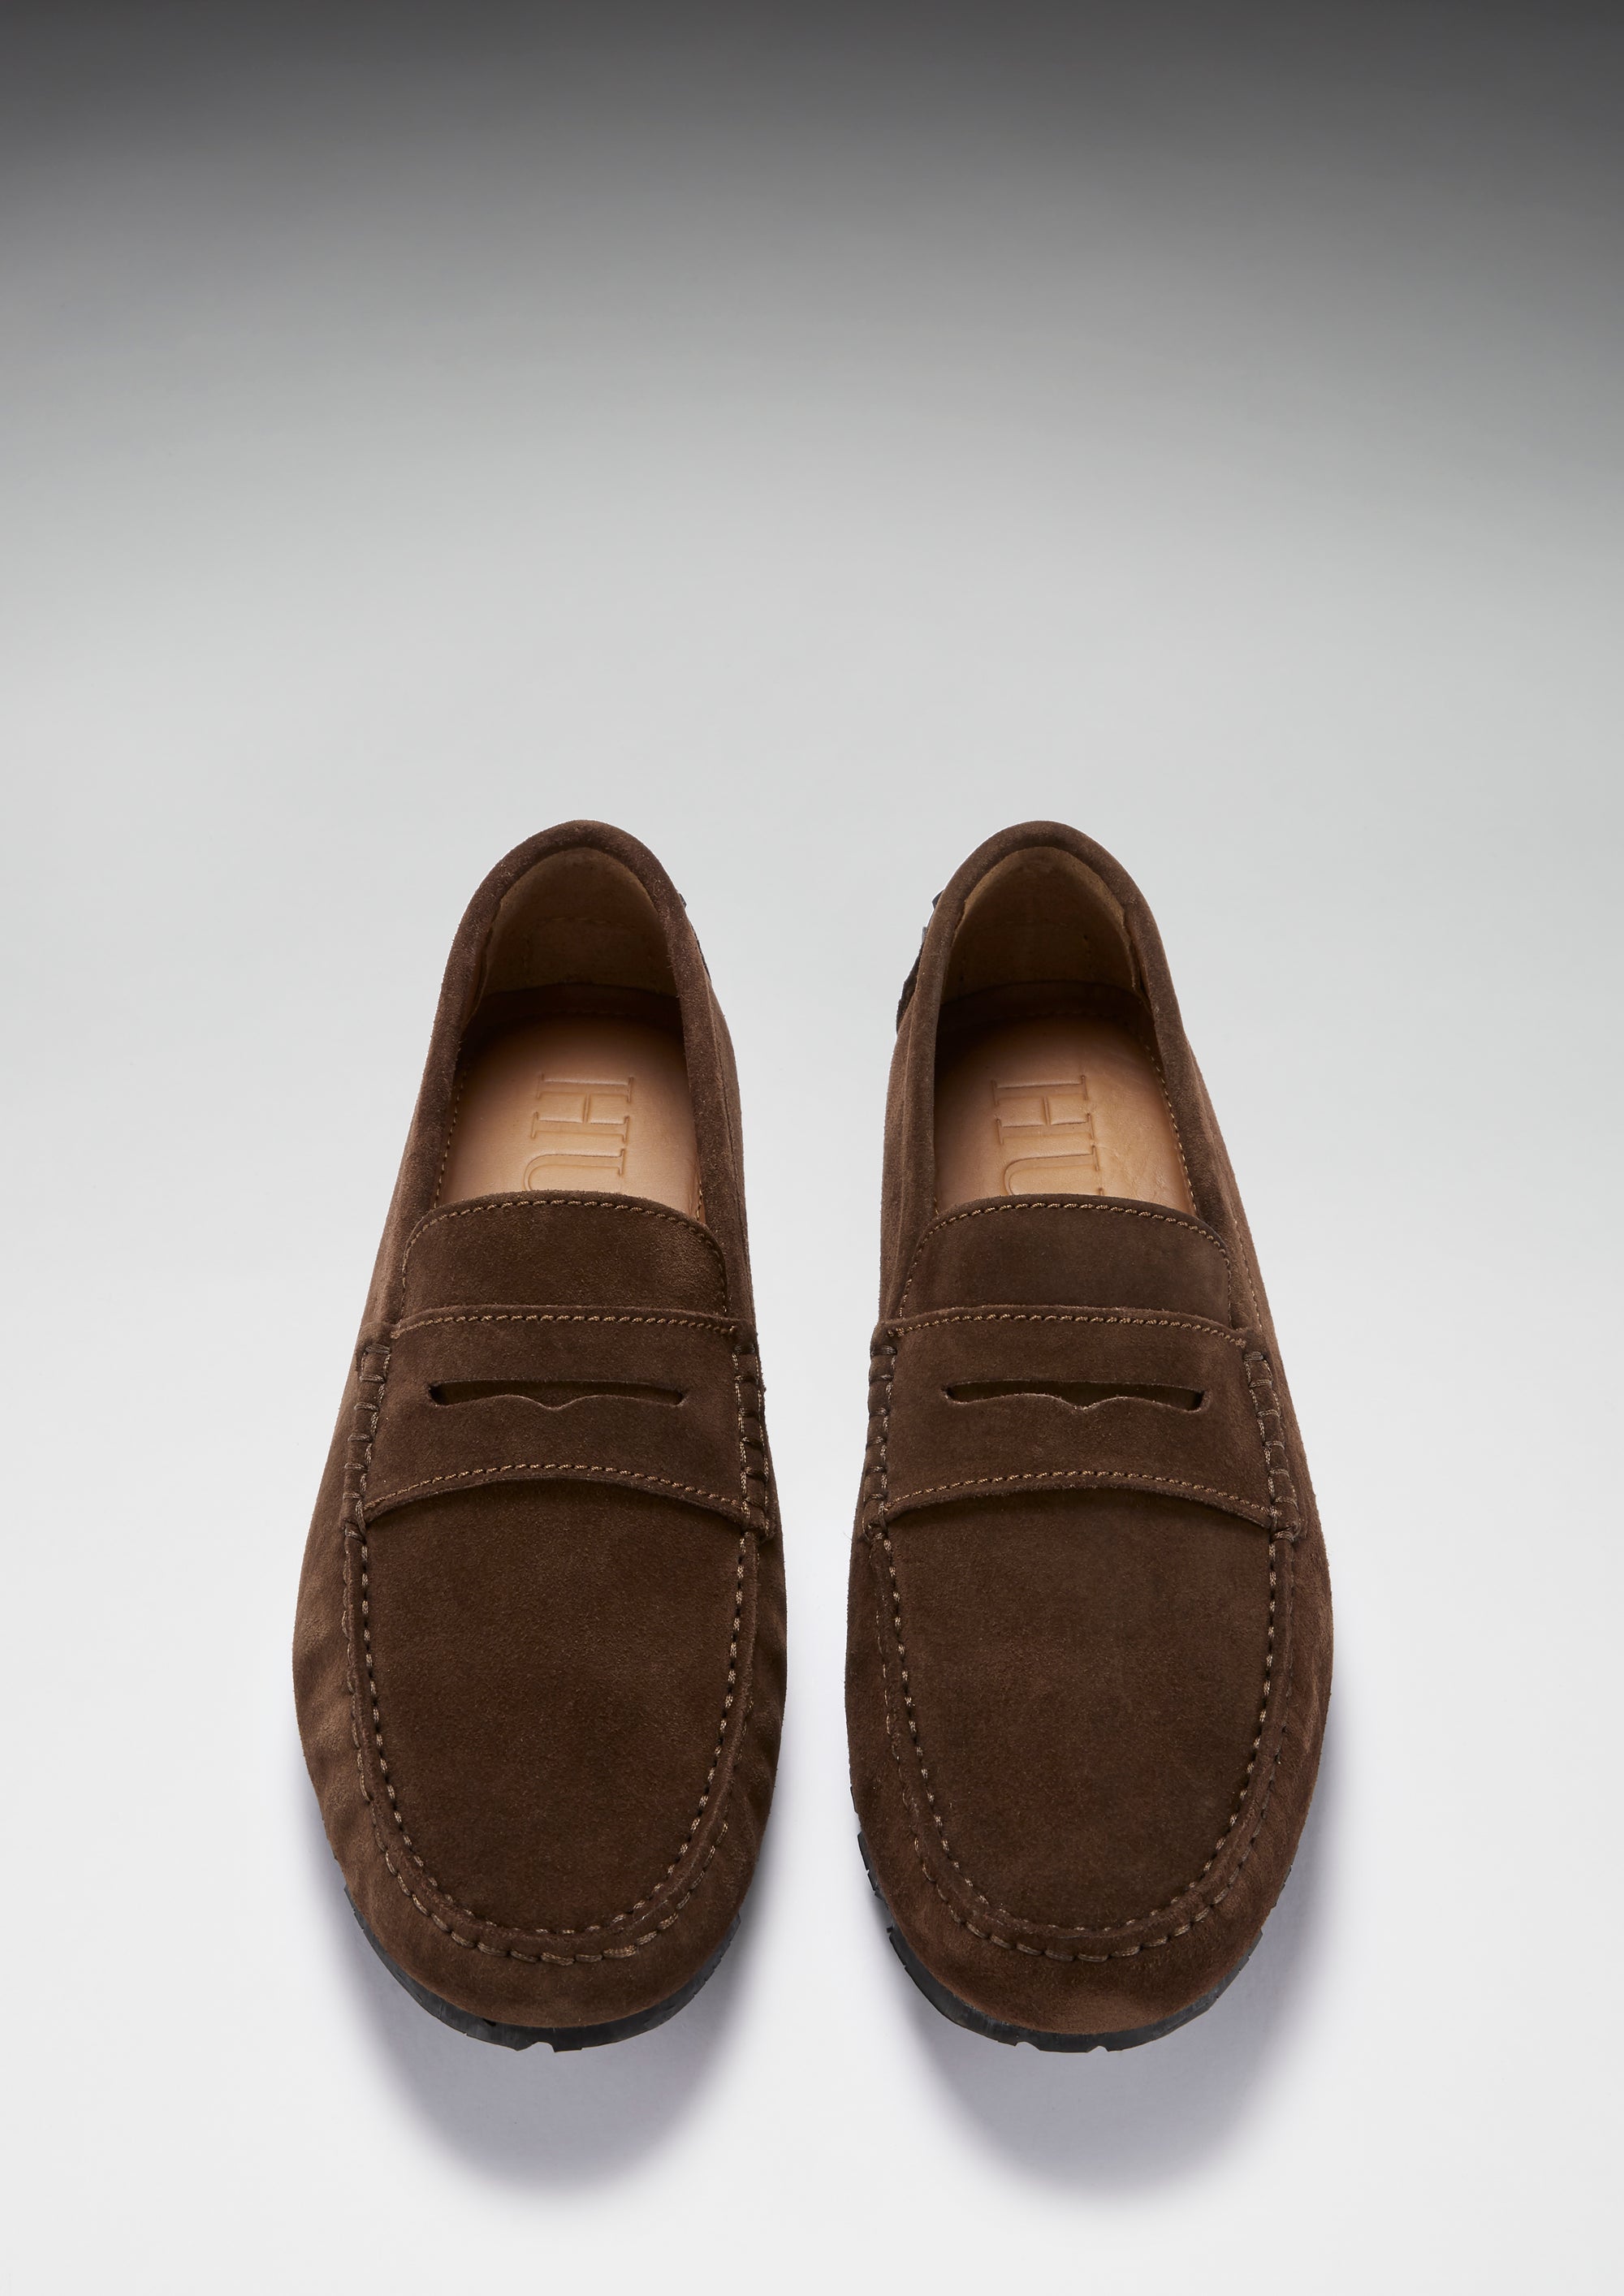 Tire Sole Penny Driving Loafer, braunes Wildleder